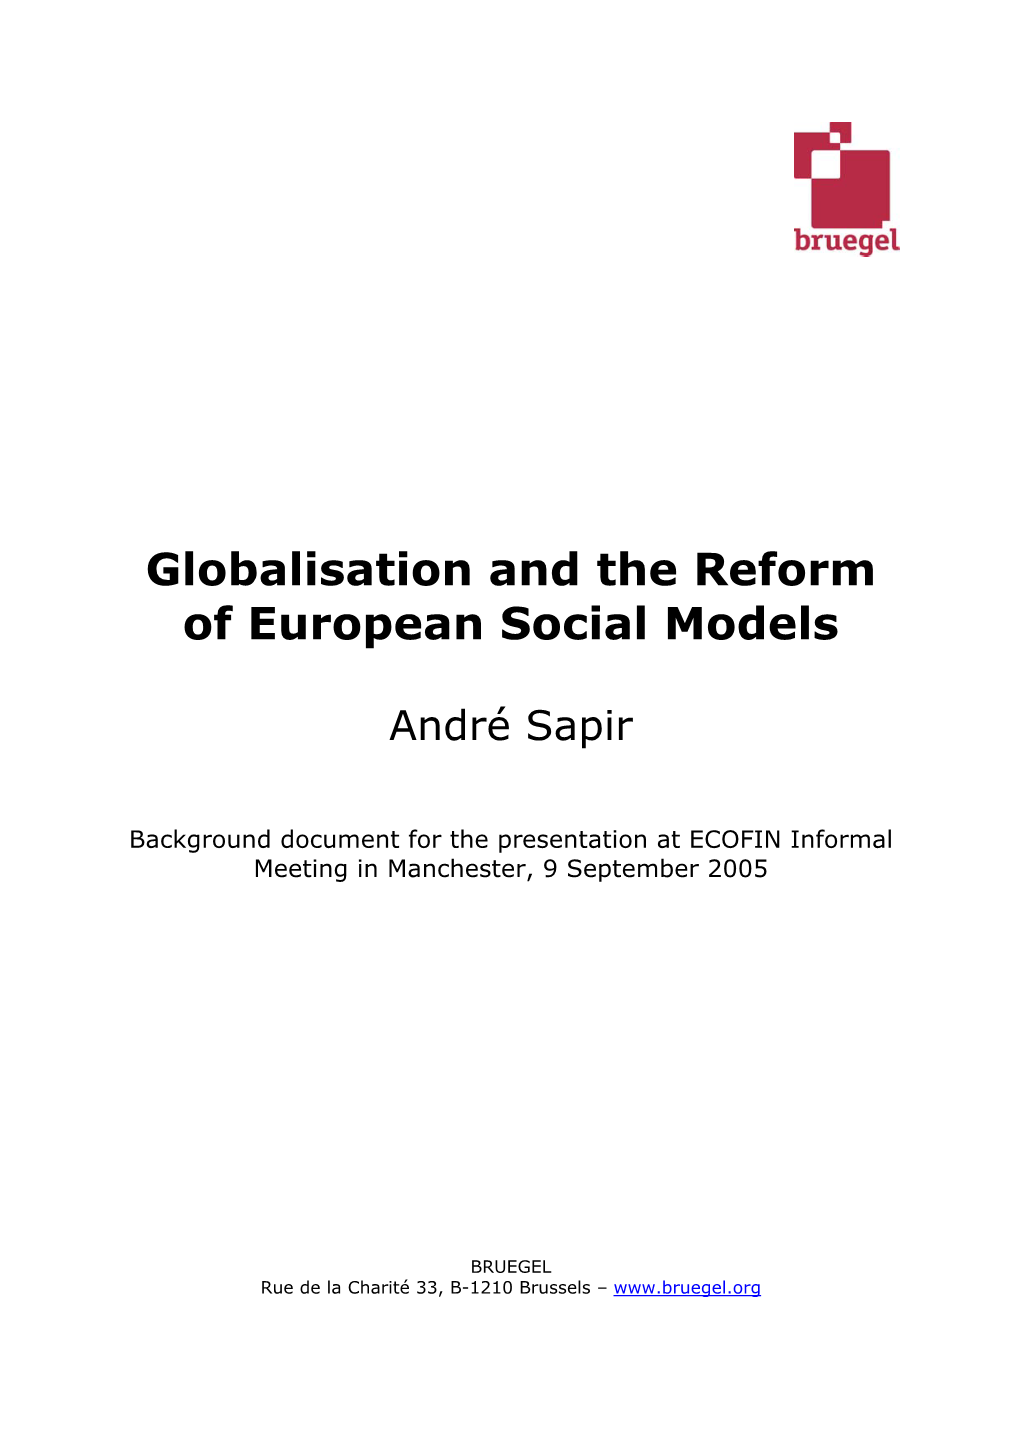 Globalisation and the Reform of European Social Models